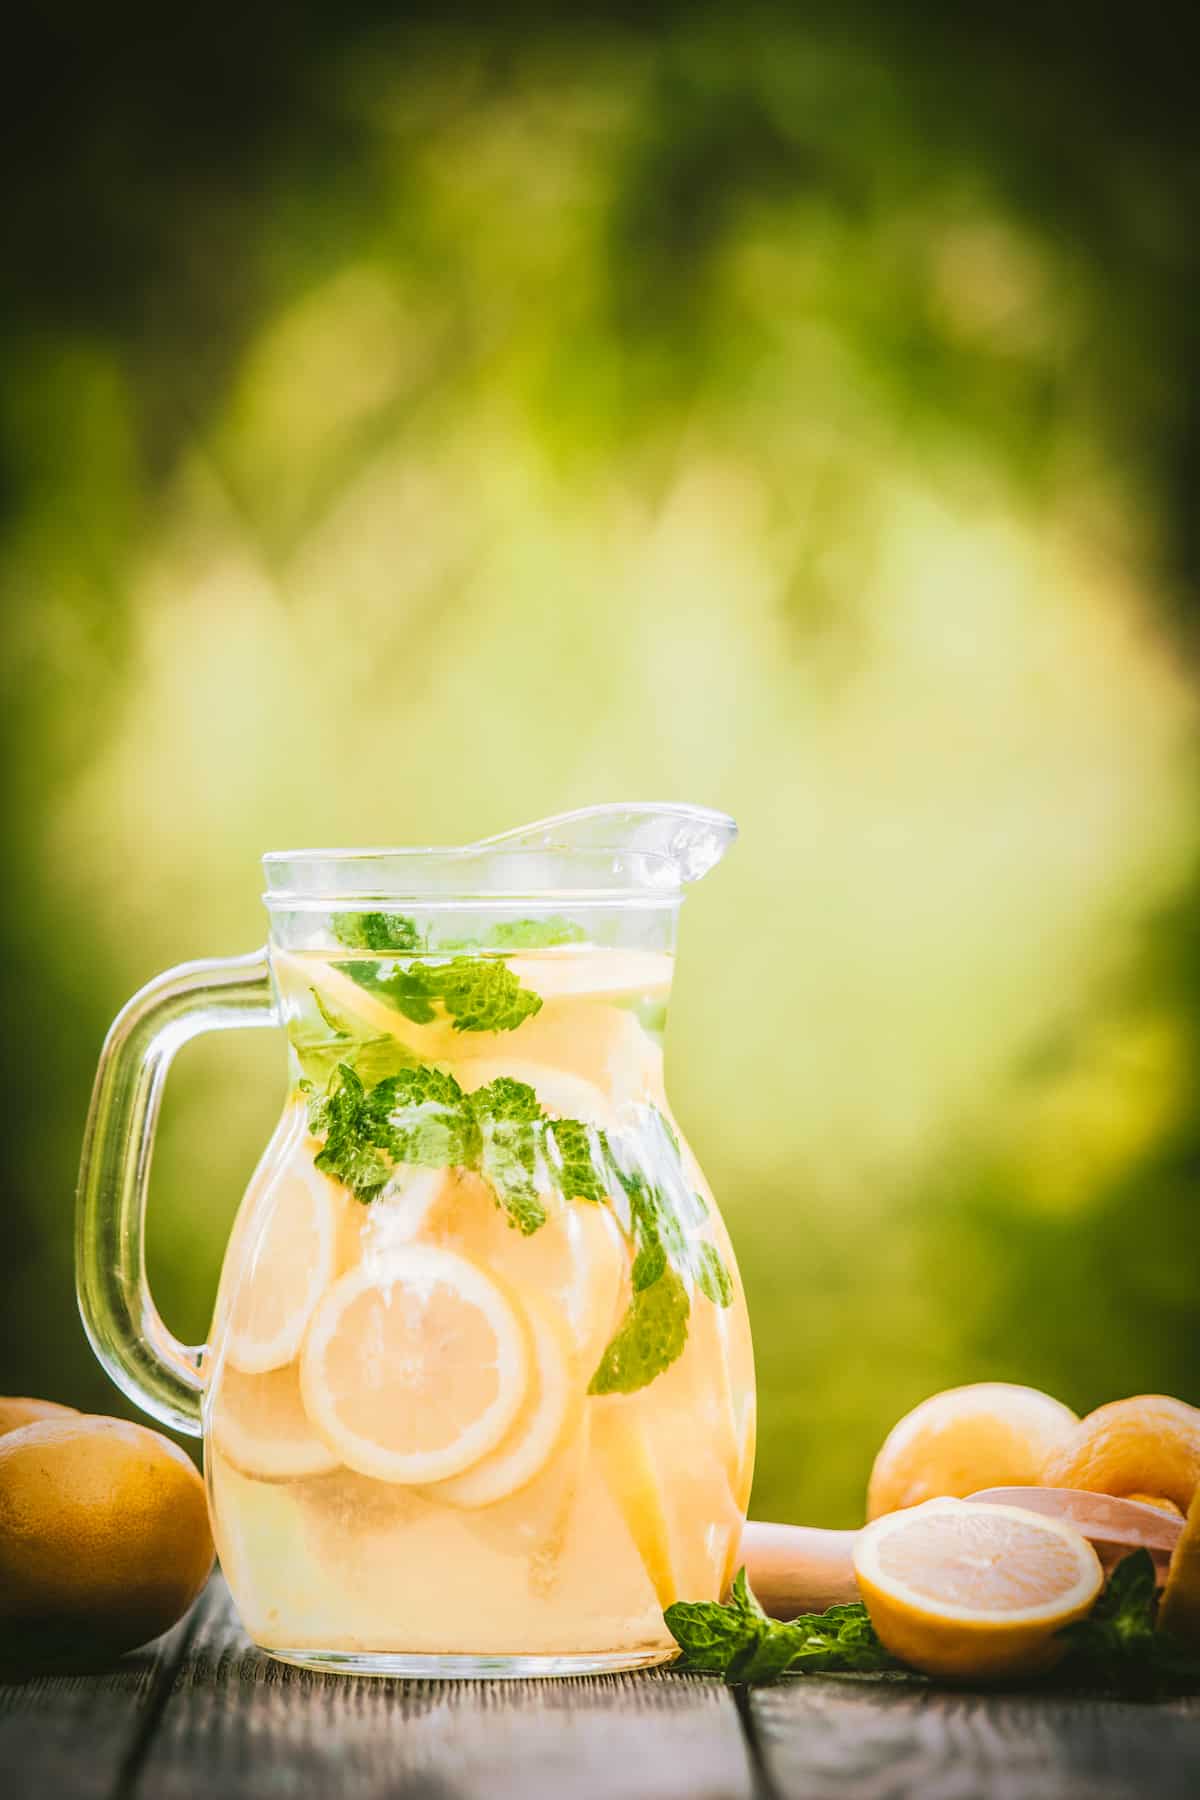 Homemade lemonade in a pitcher next to lemons and a juicer